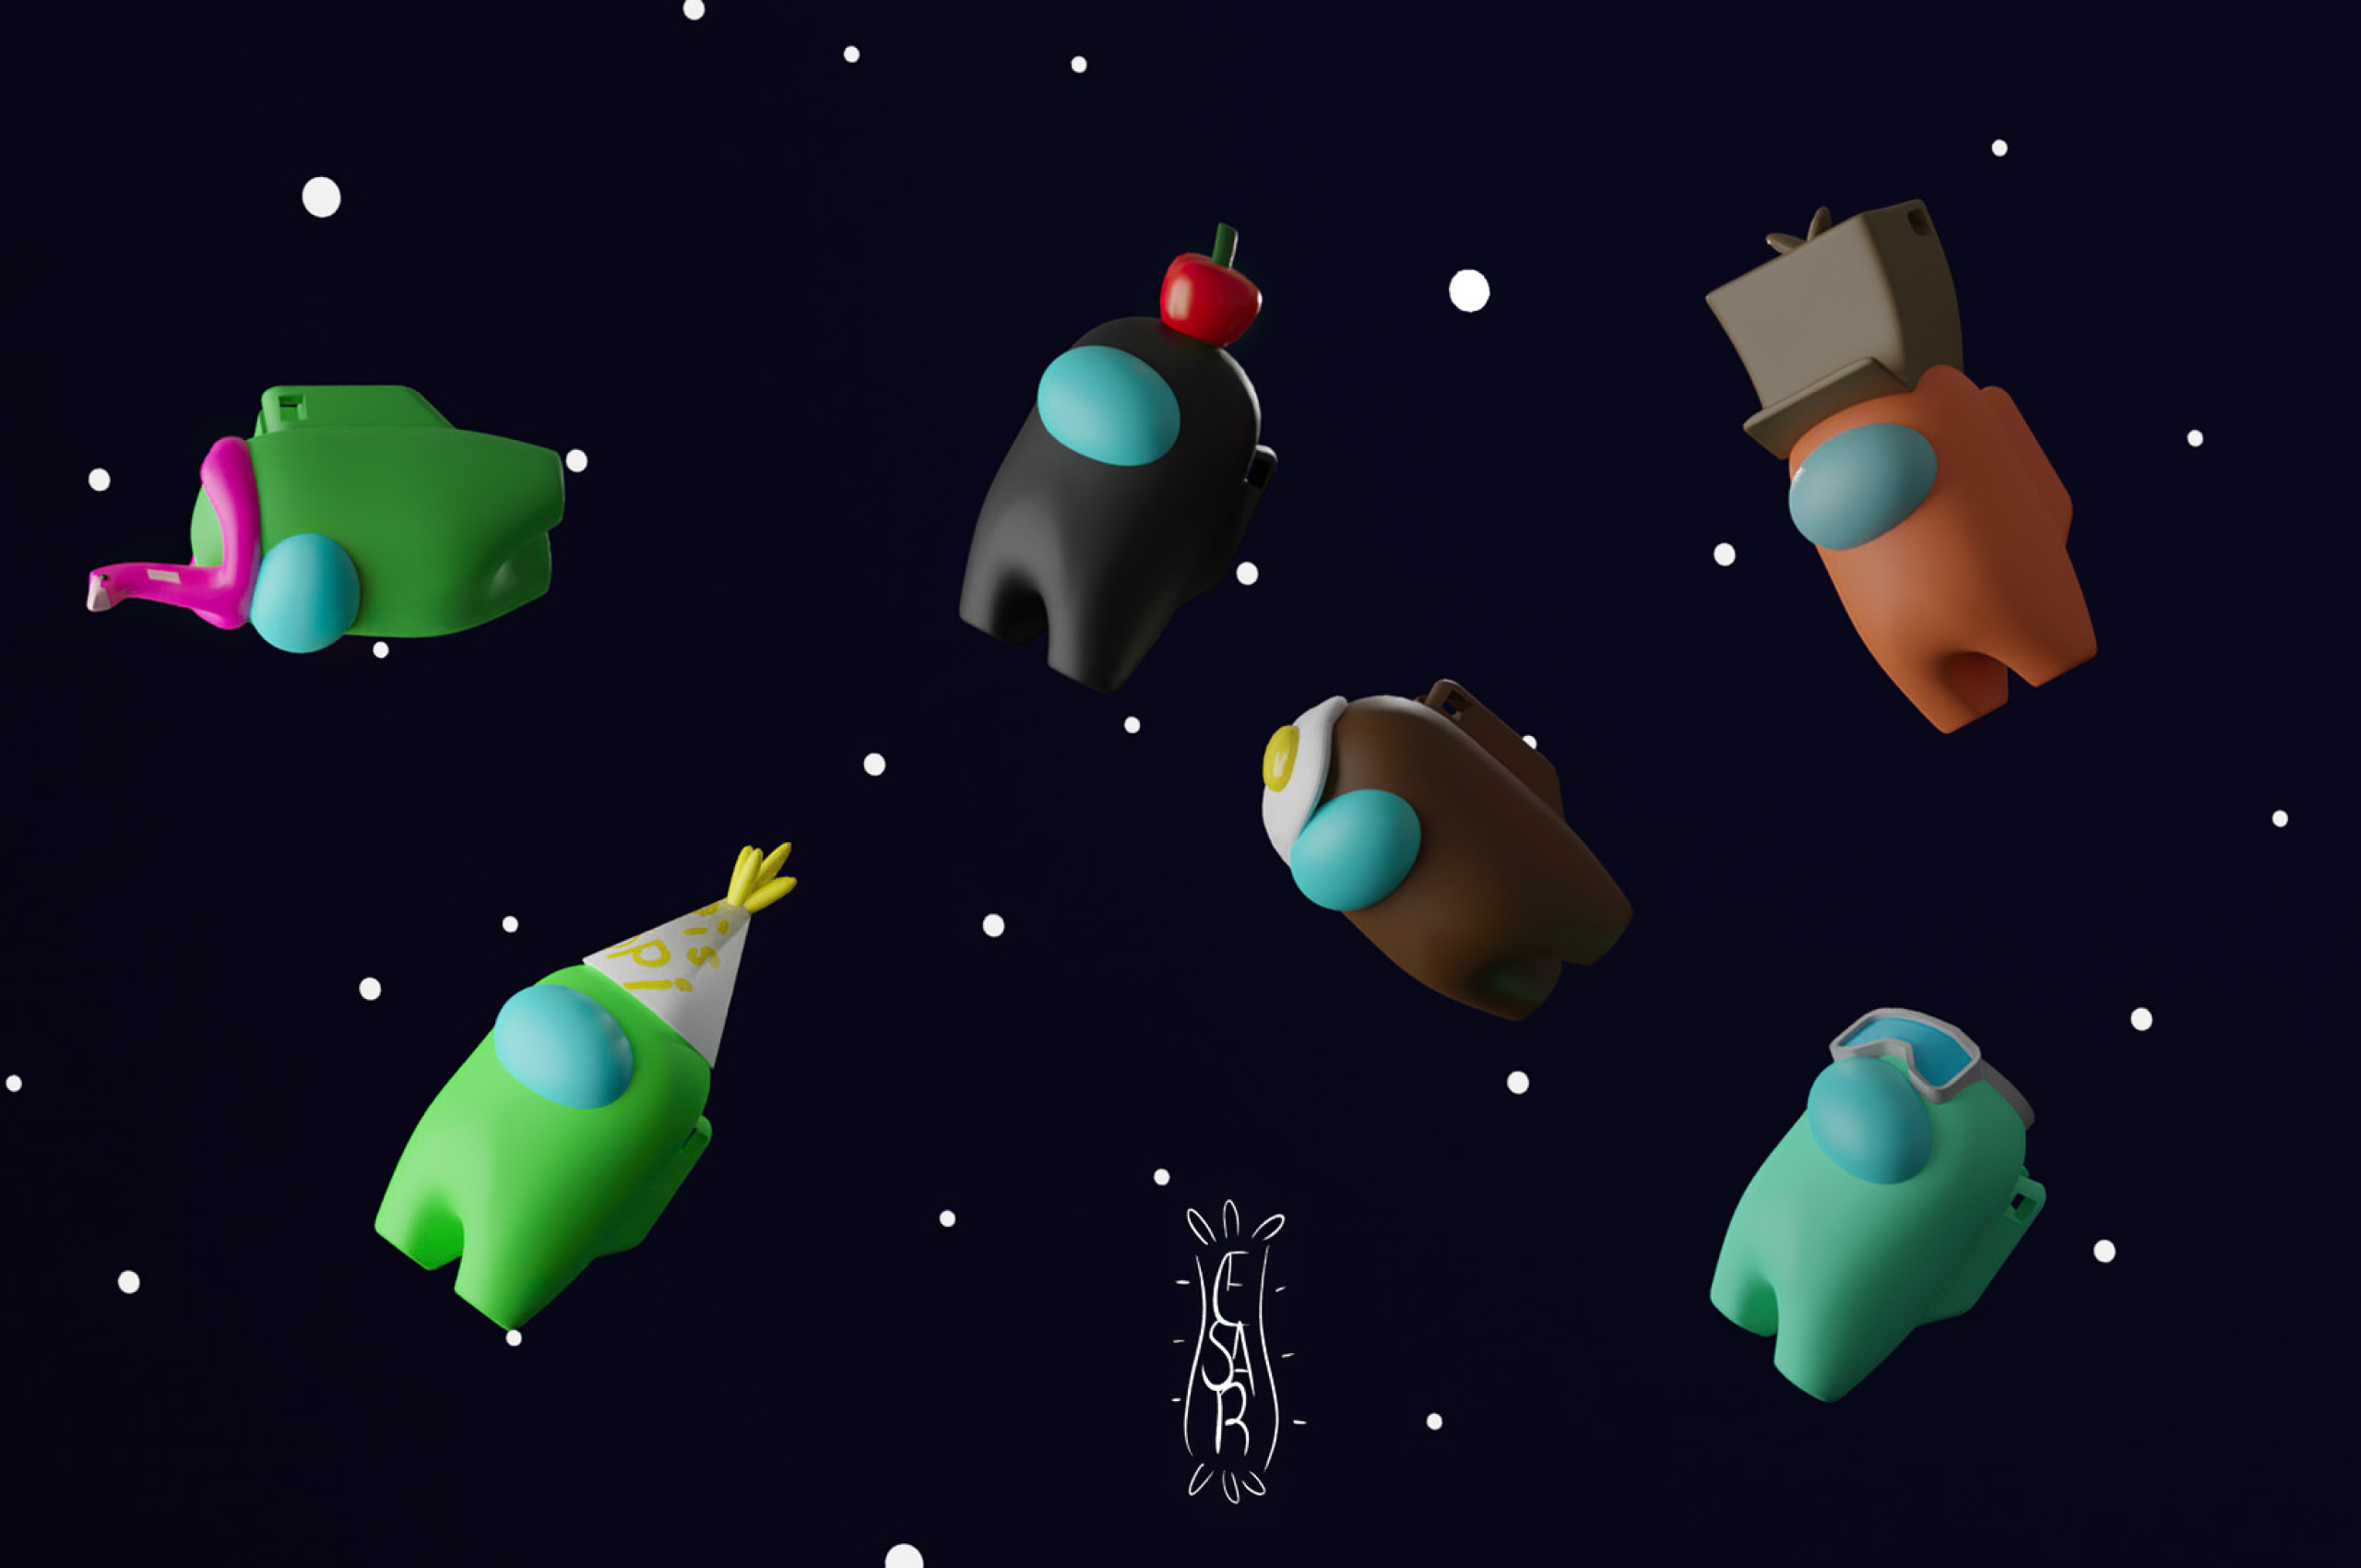 A group of toys in the sky - 3D